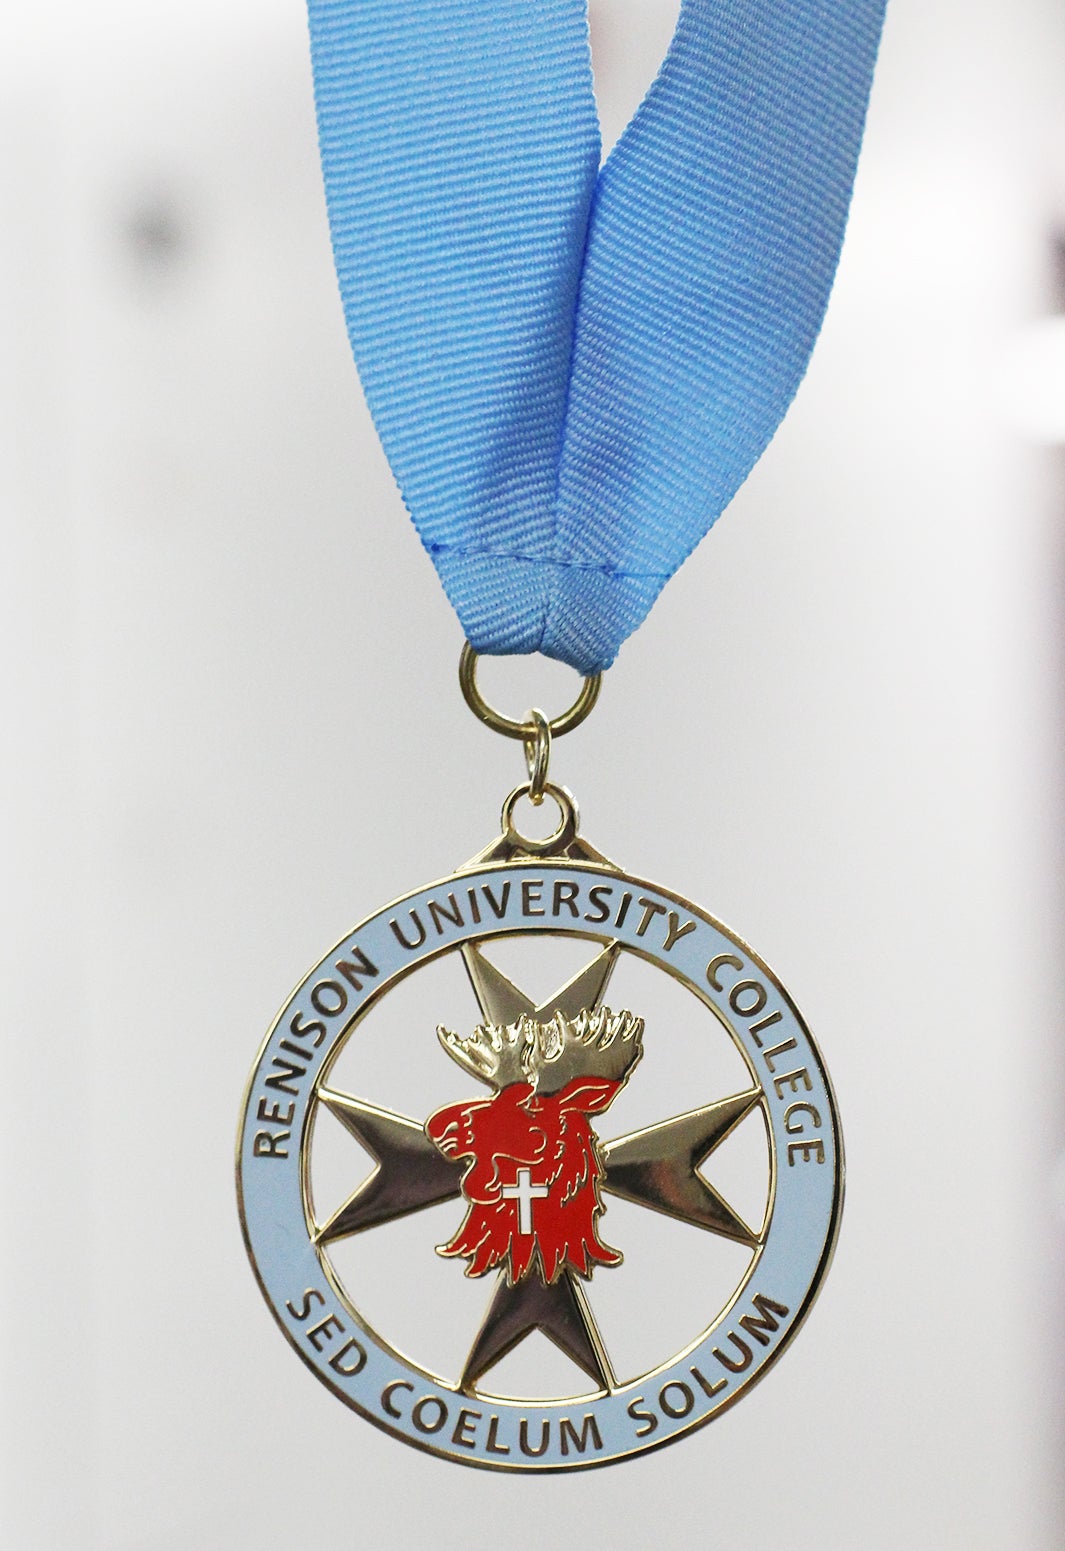 Honorary member medal, hanging from a blue ribbon. 